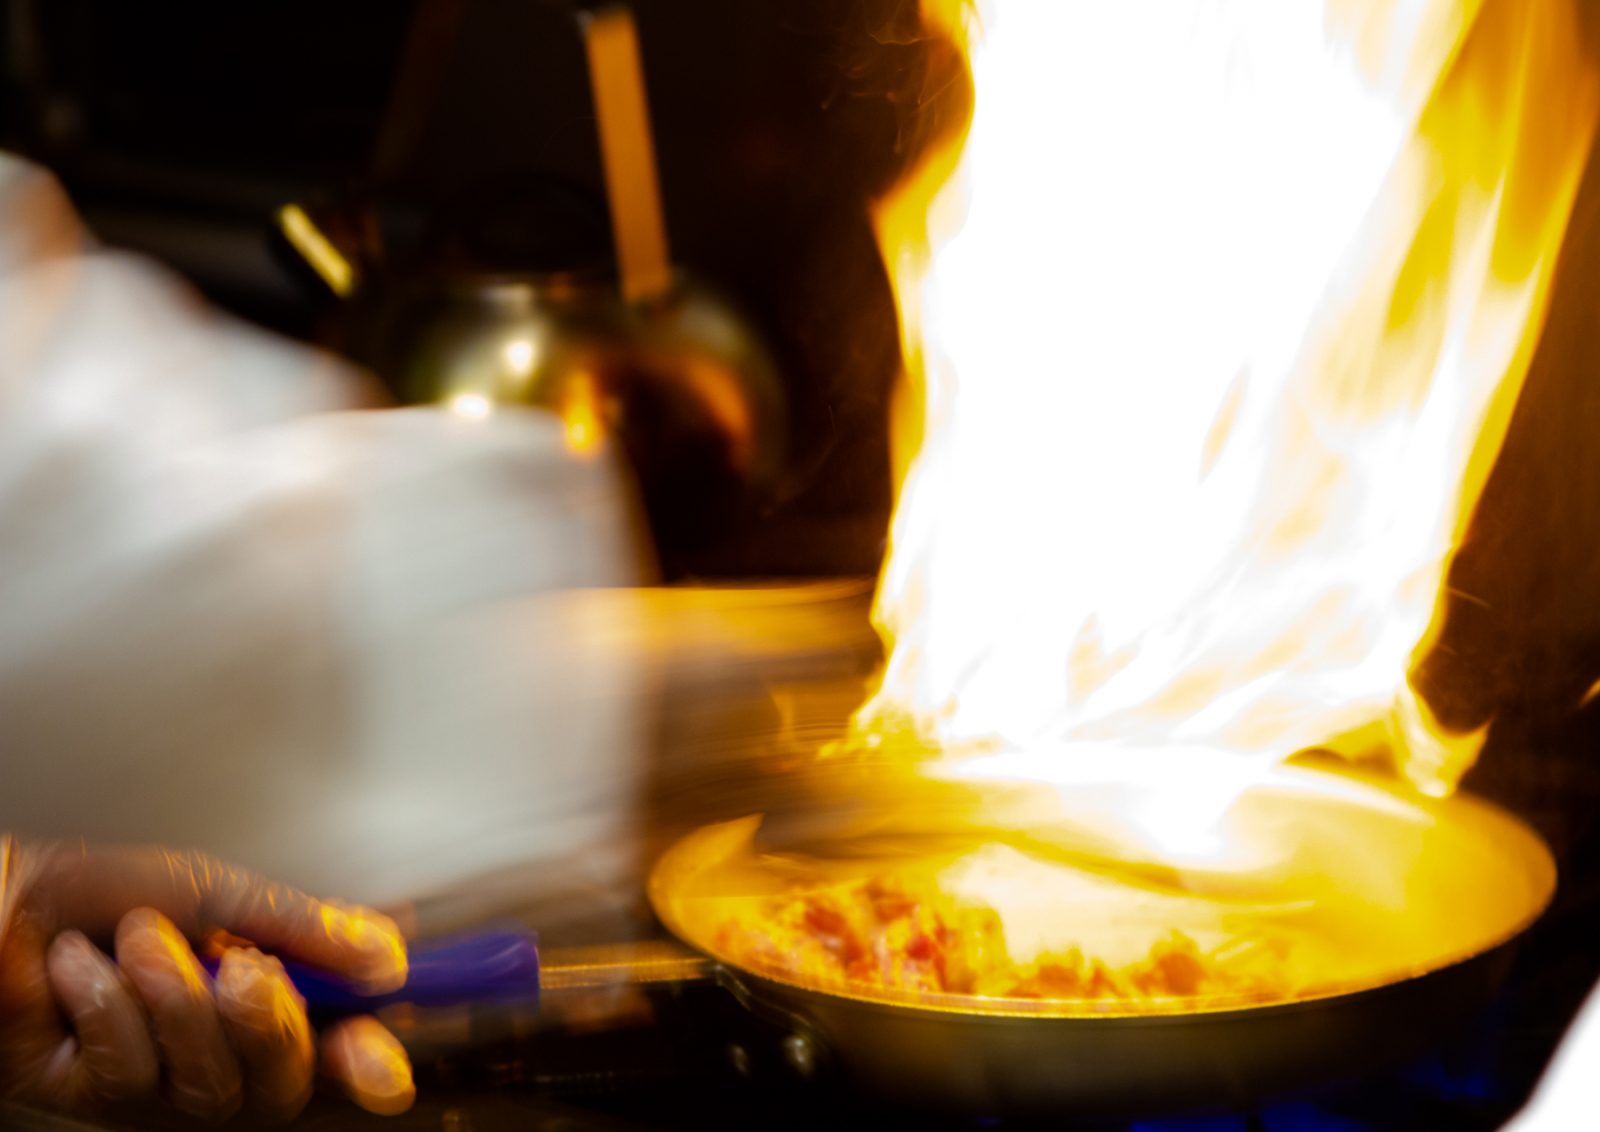 A chef extinguishes a stovetop flame at Blue Nile restaurant